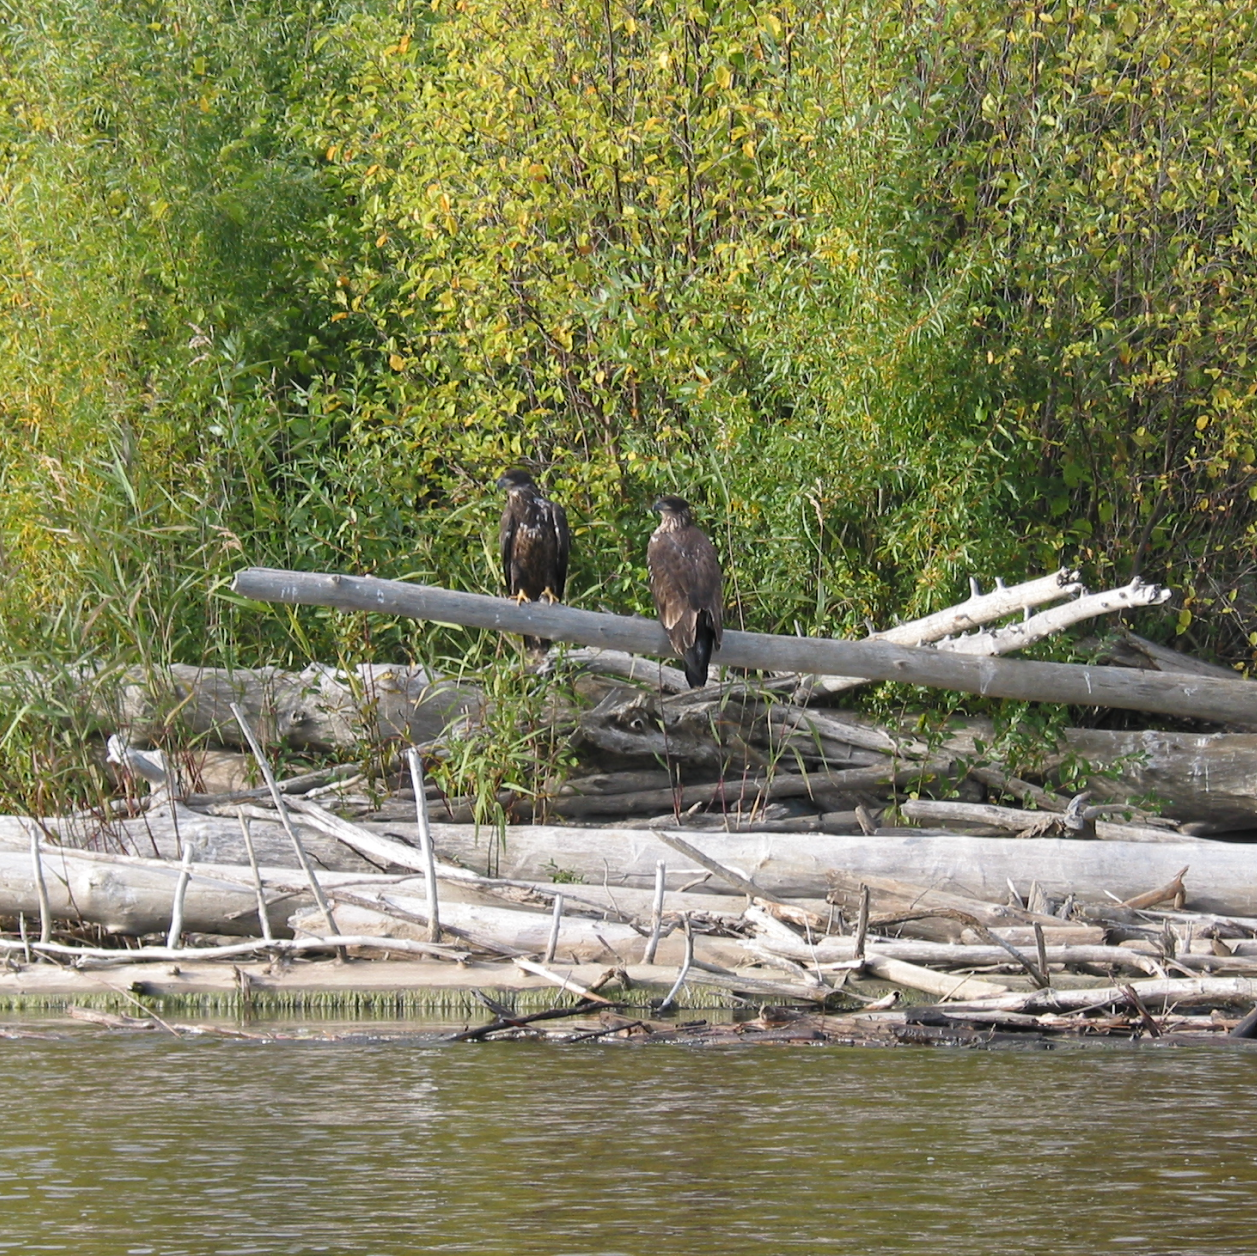 Two eagles perched on a log along the Athabasca River.